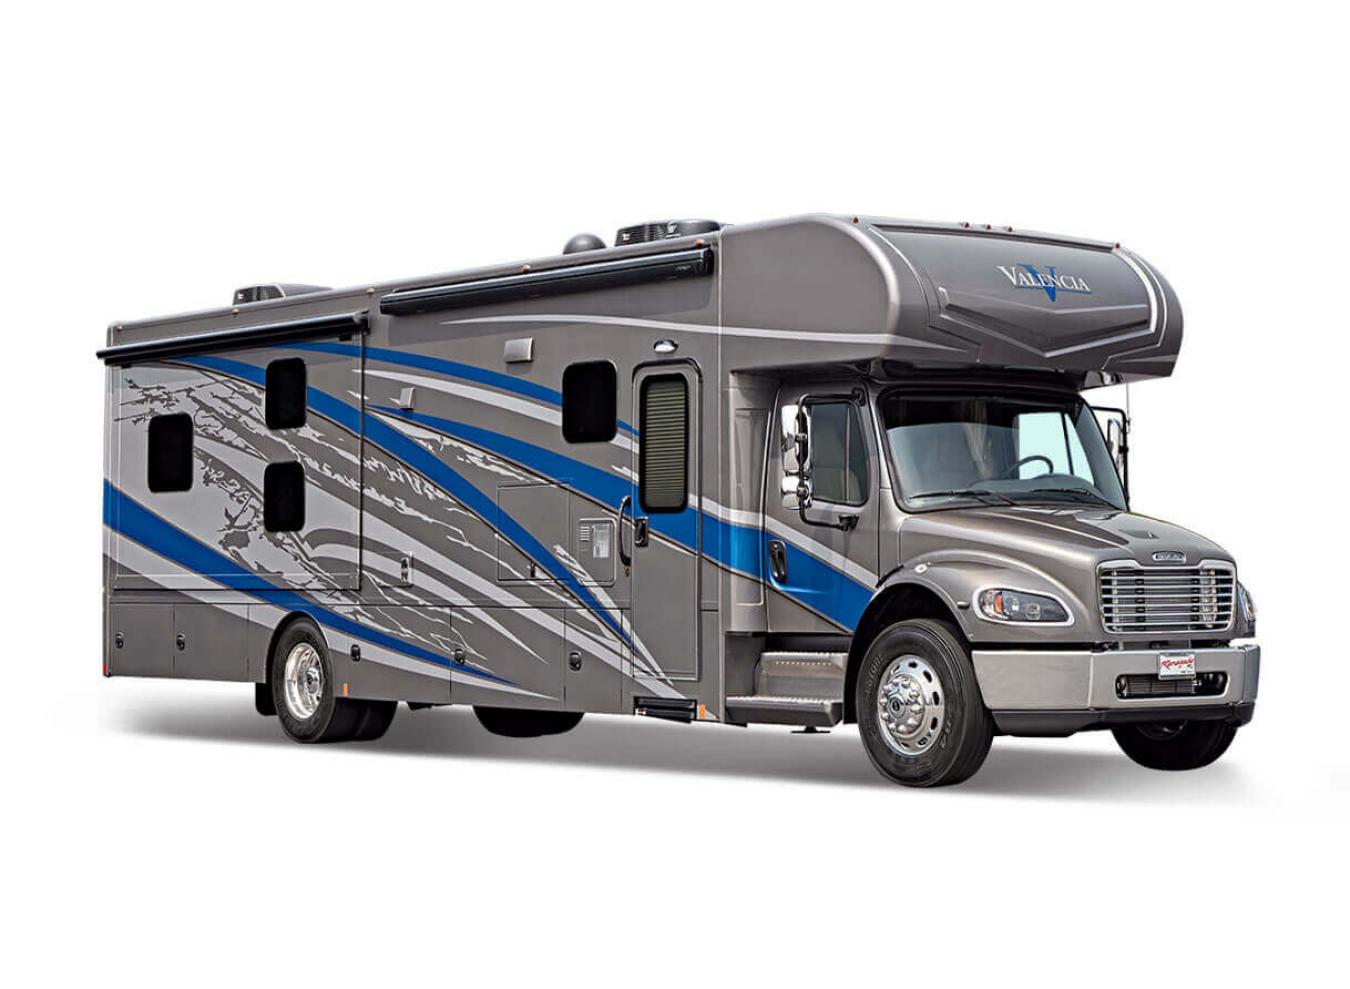 Exterior view of a Renegade Valencia RV on a white background